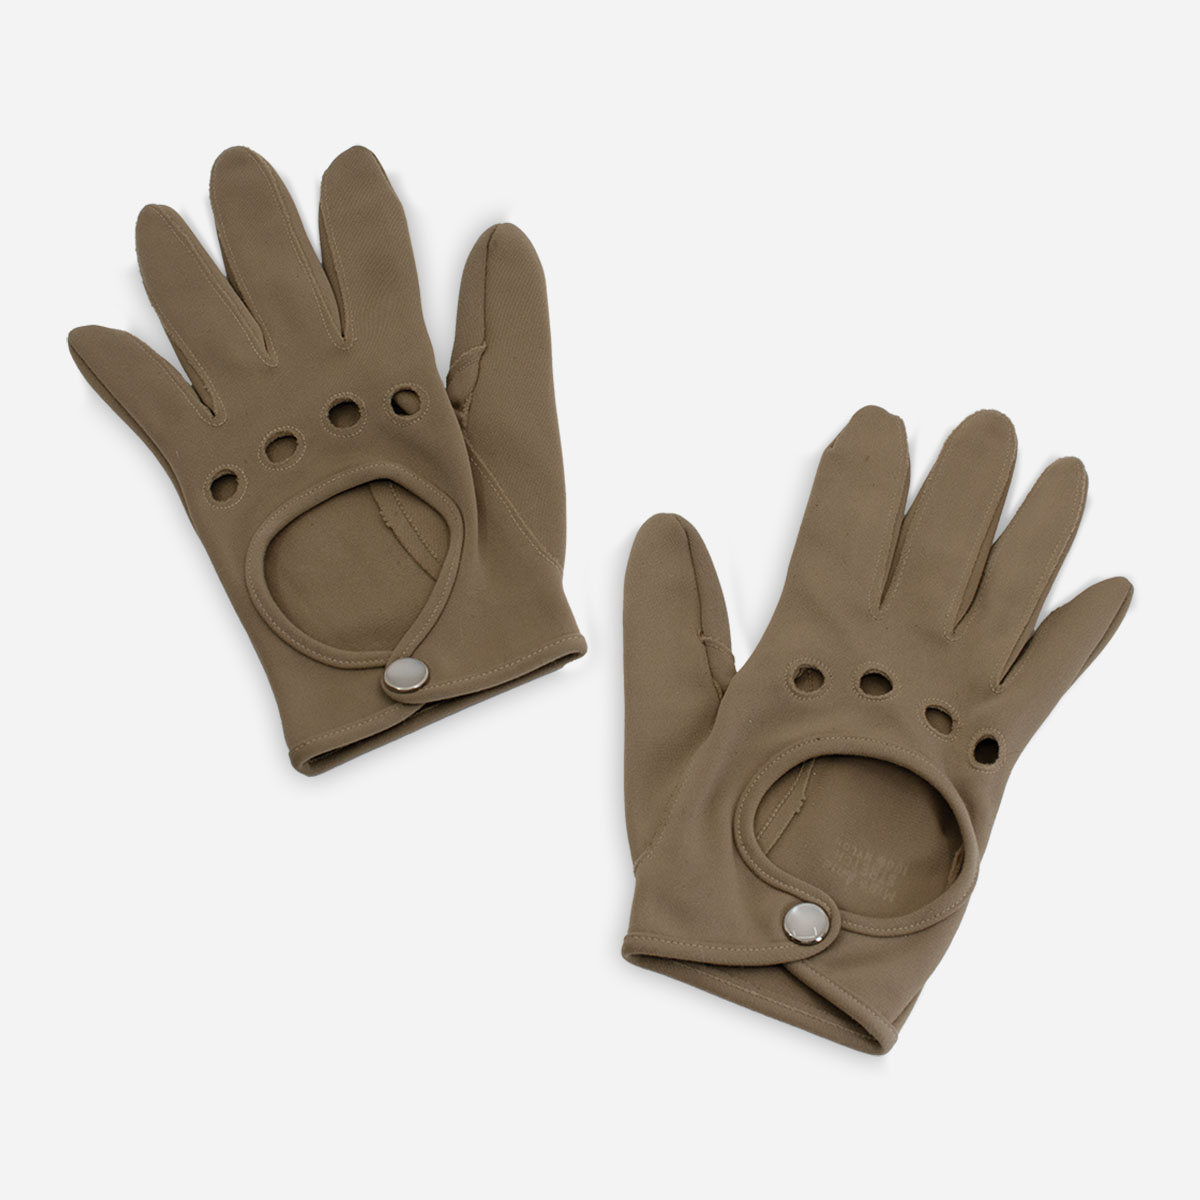 1950s womens driving gloves